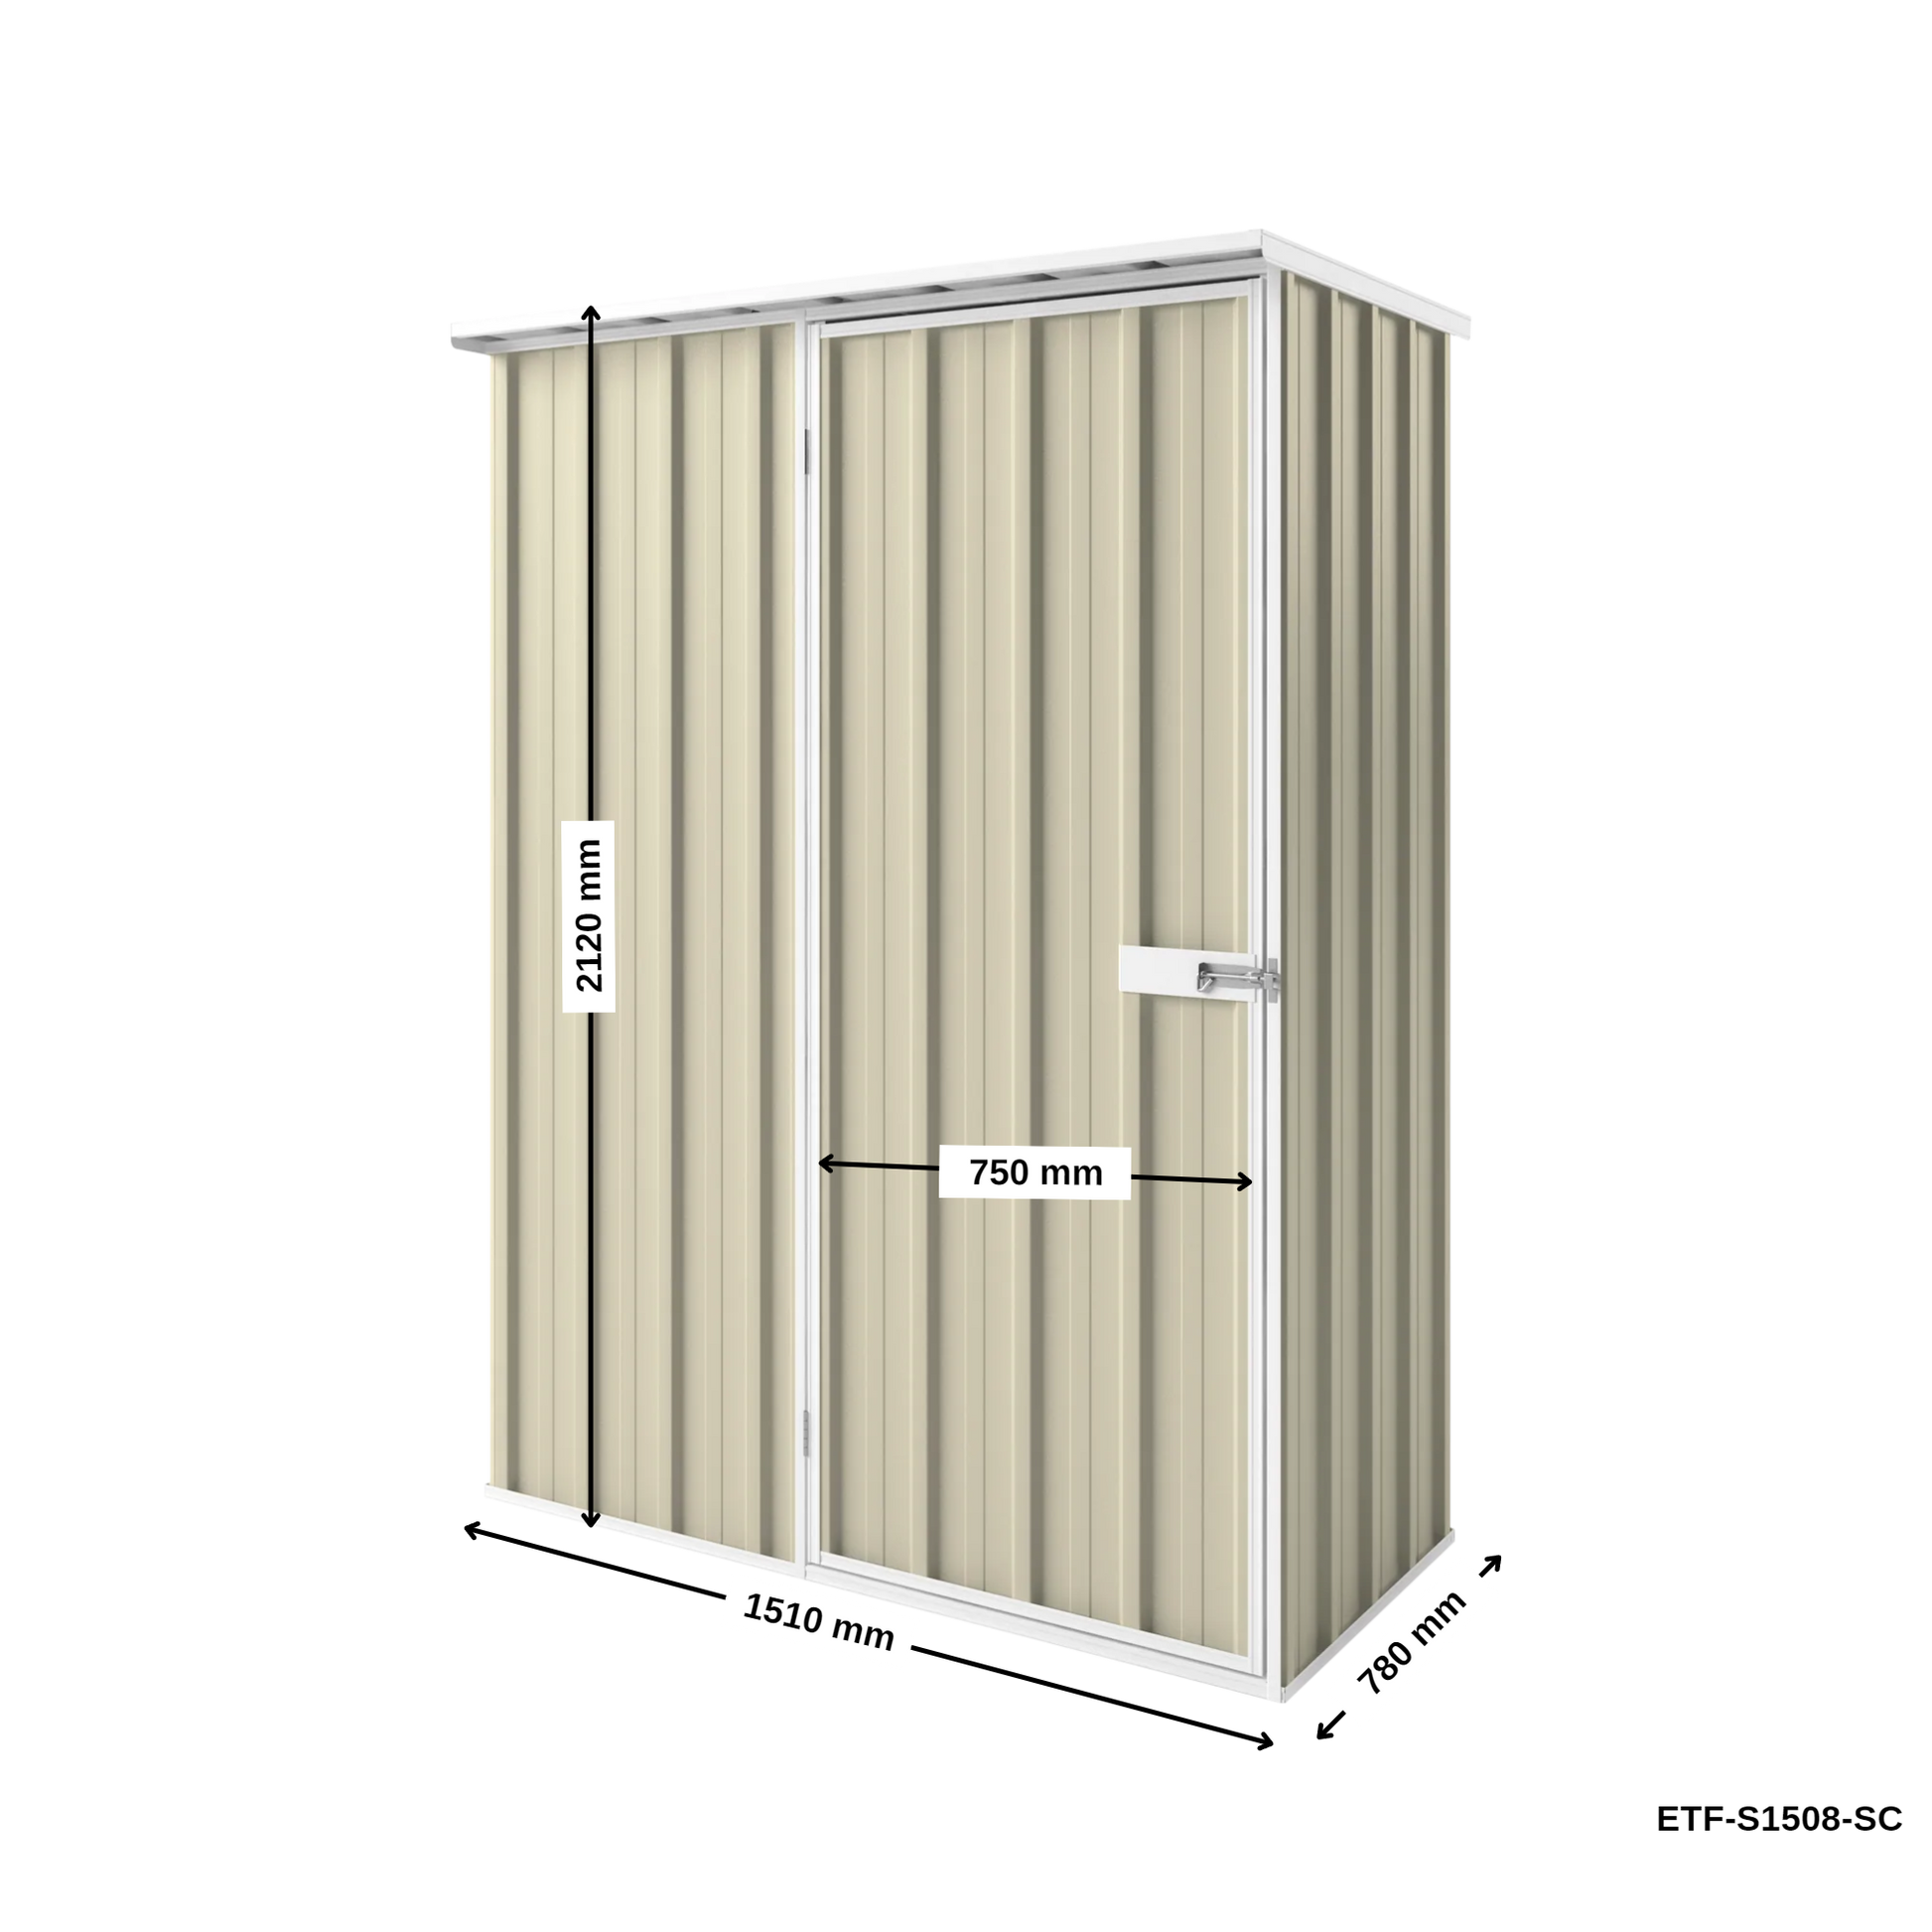 1.5m x 0.78m Flat Roof Garden Shed - EasyShed